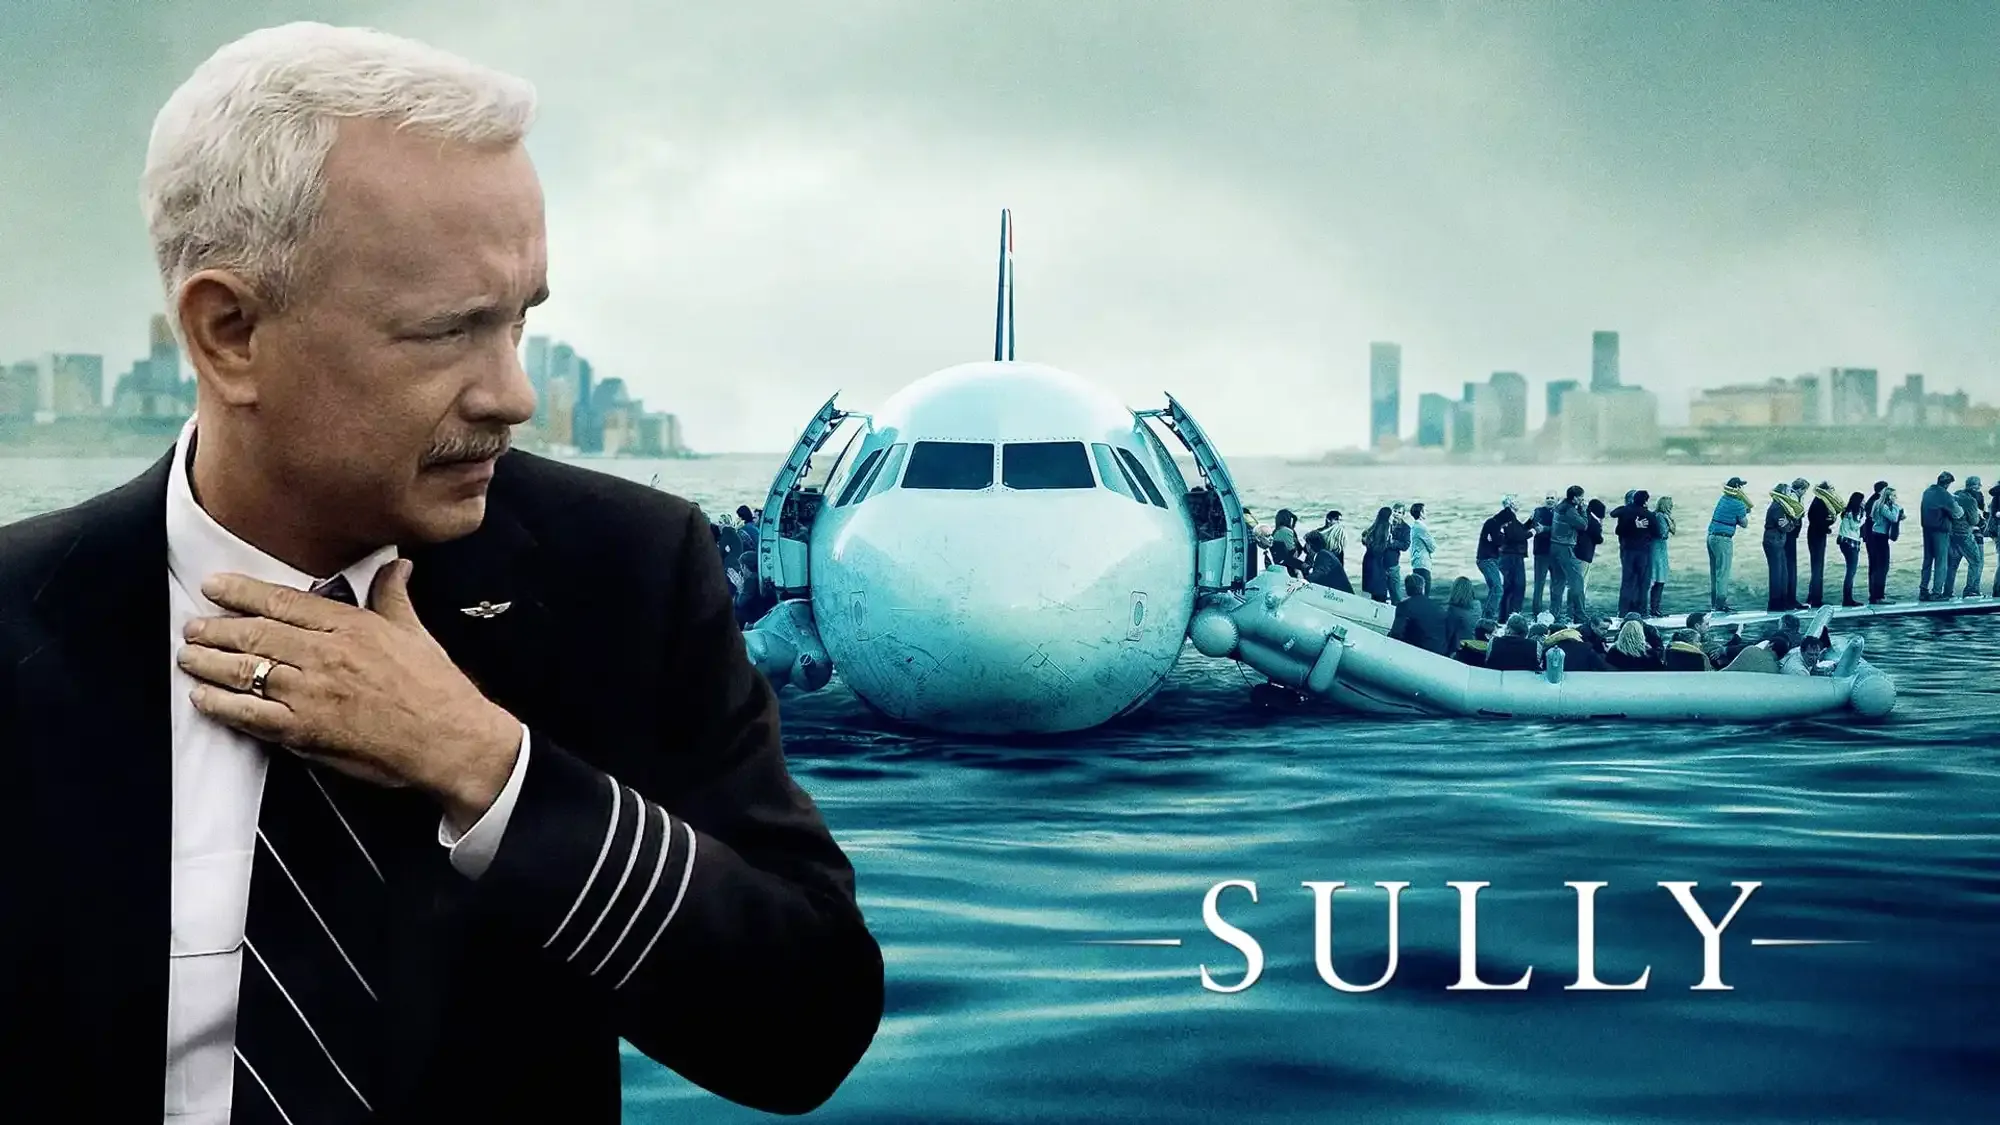 Sully movie review